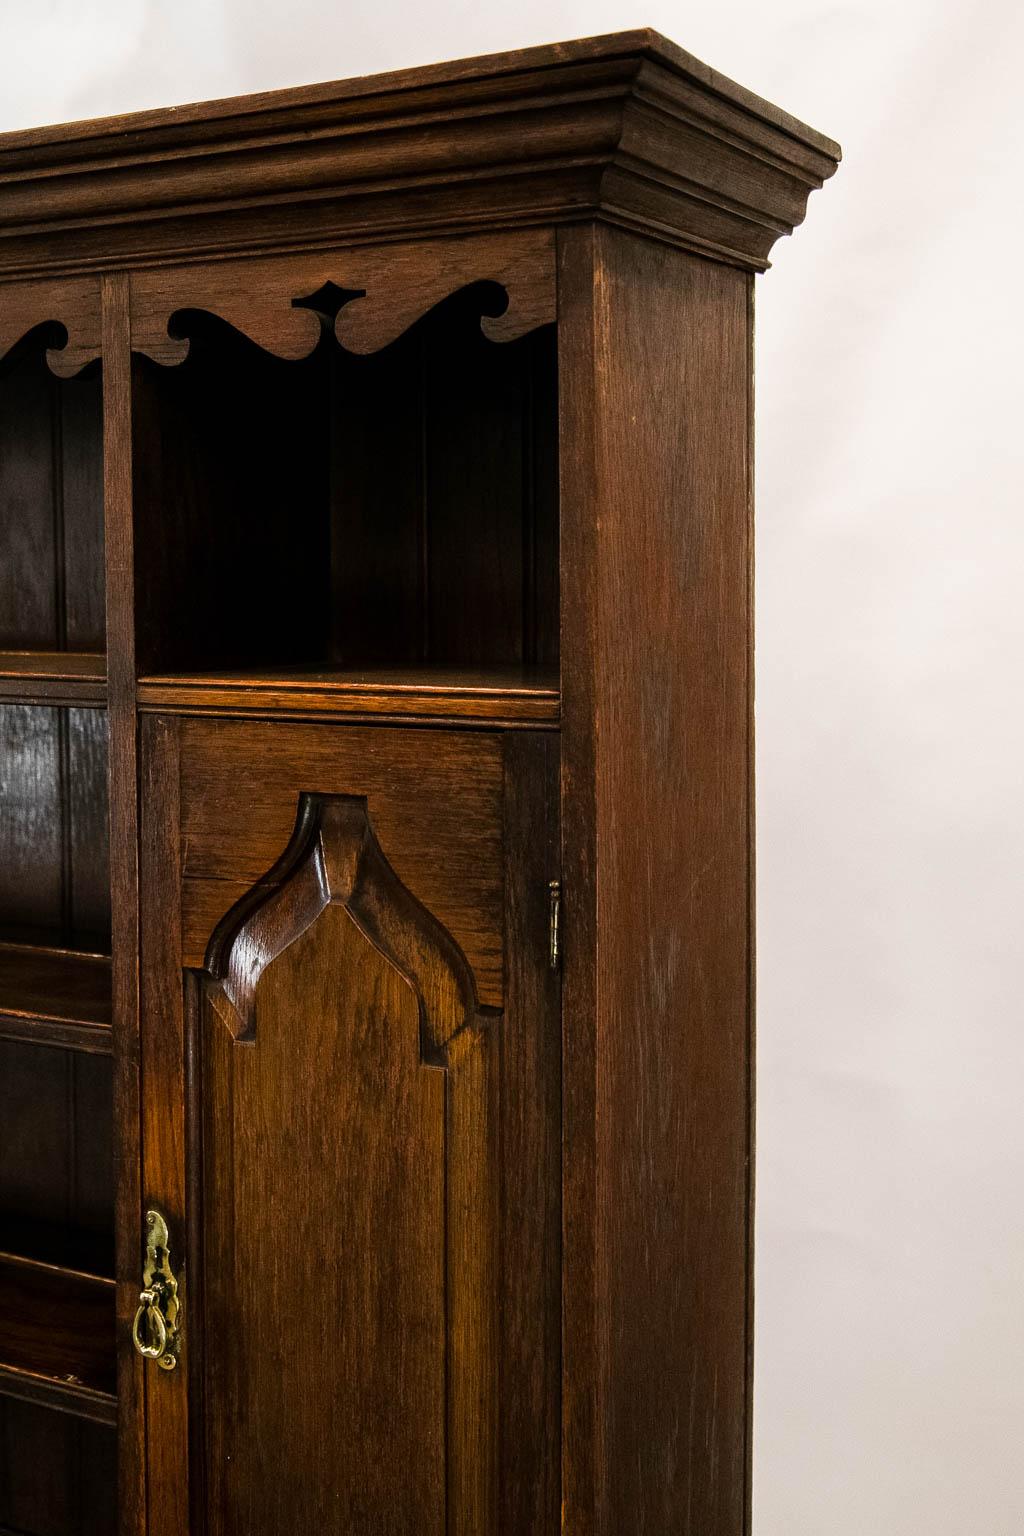 The cornice of this oak dresser has a scalloped frieze and two doors with raised gothic panels. The drawers have geometric moldings with a potboard below supported by bulbous legs.